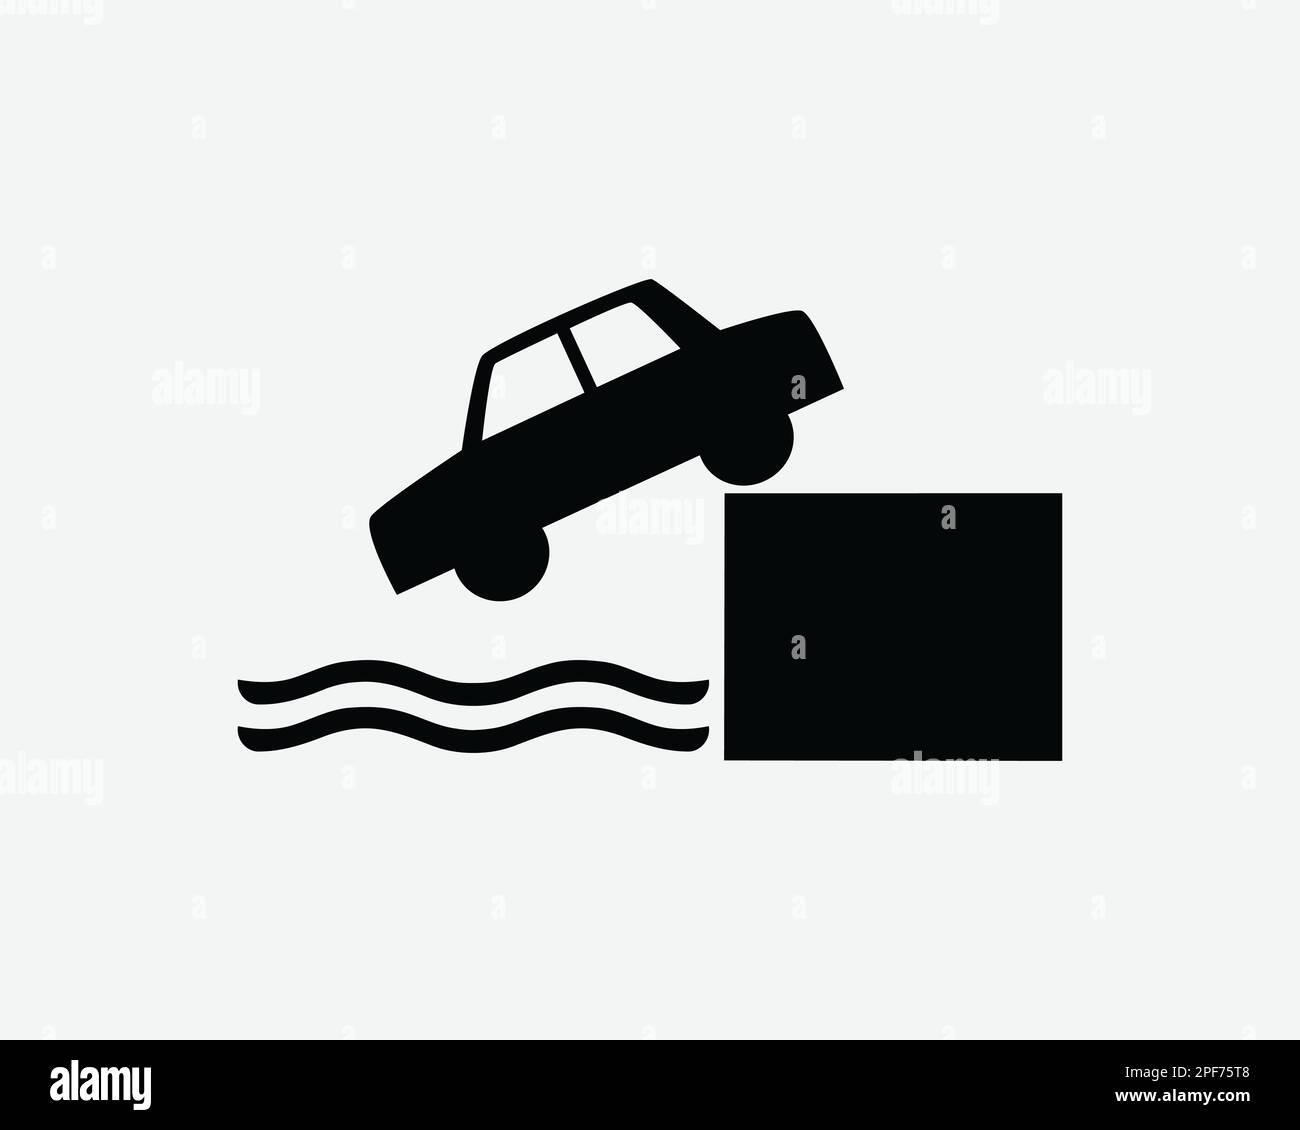 Car Drive off Cliff Icon Vehicle Fall Falling into Water Sea Vector Black White Silhouette Symbol Sign Graphic Clipart Artwork Illustration Pictogram Stock Vector